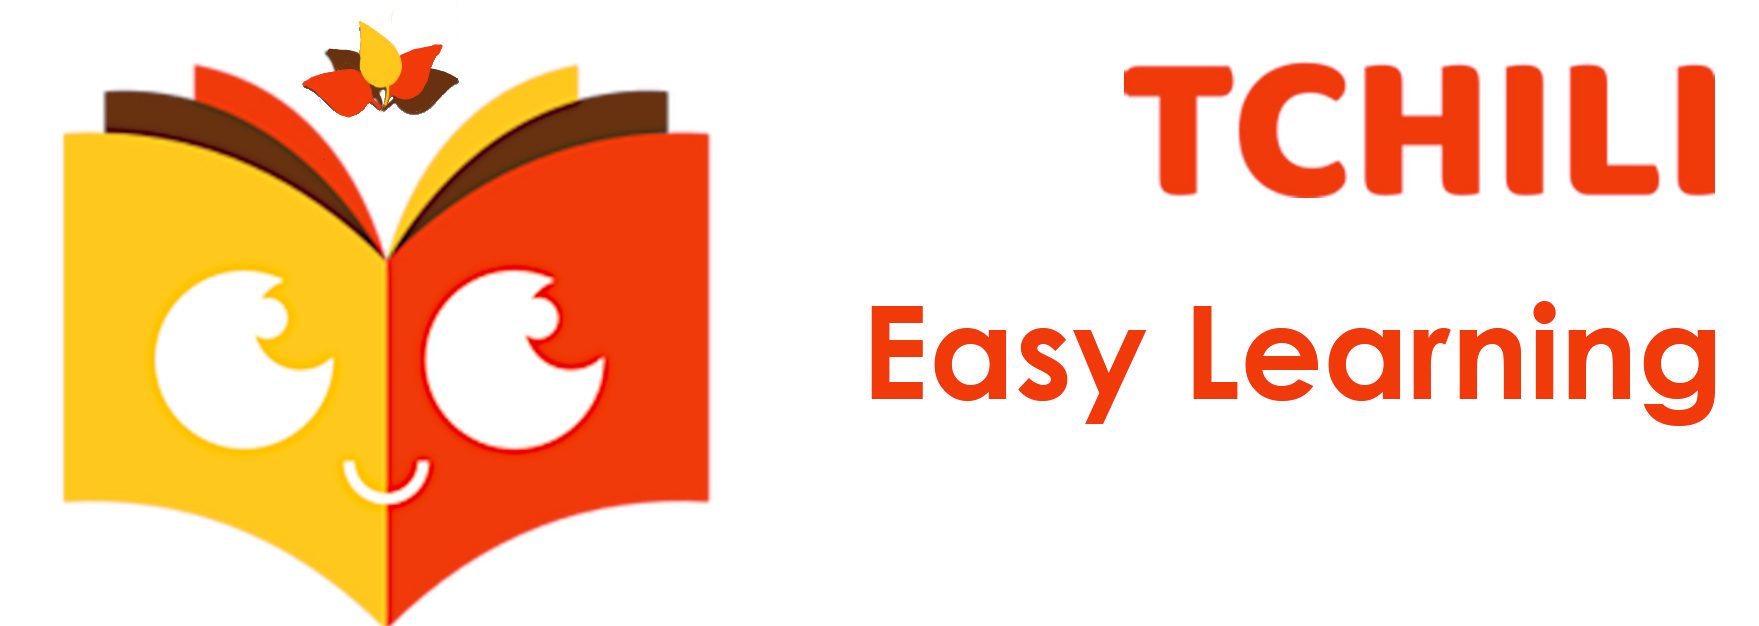 Tchili Easy Learning – Réserve ton camp